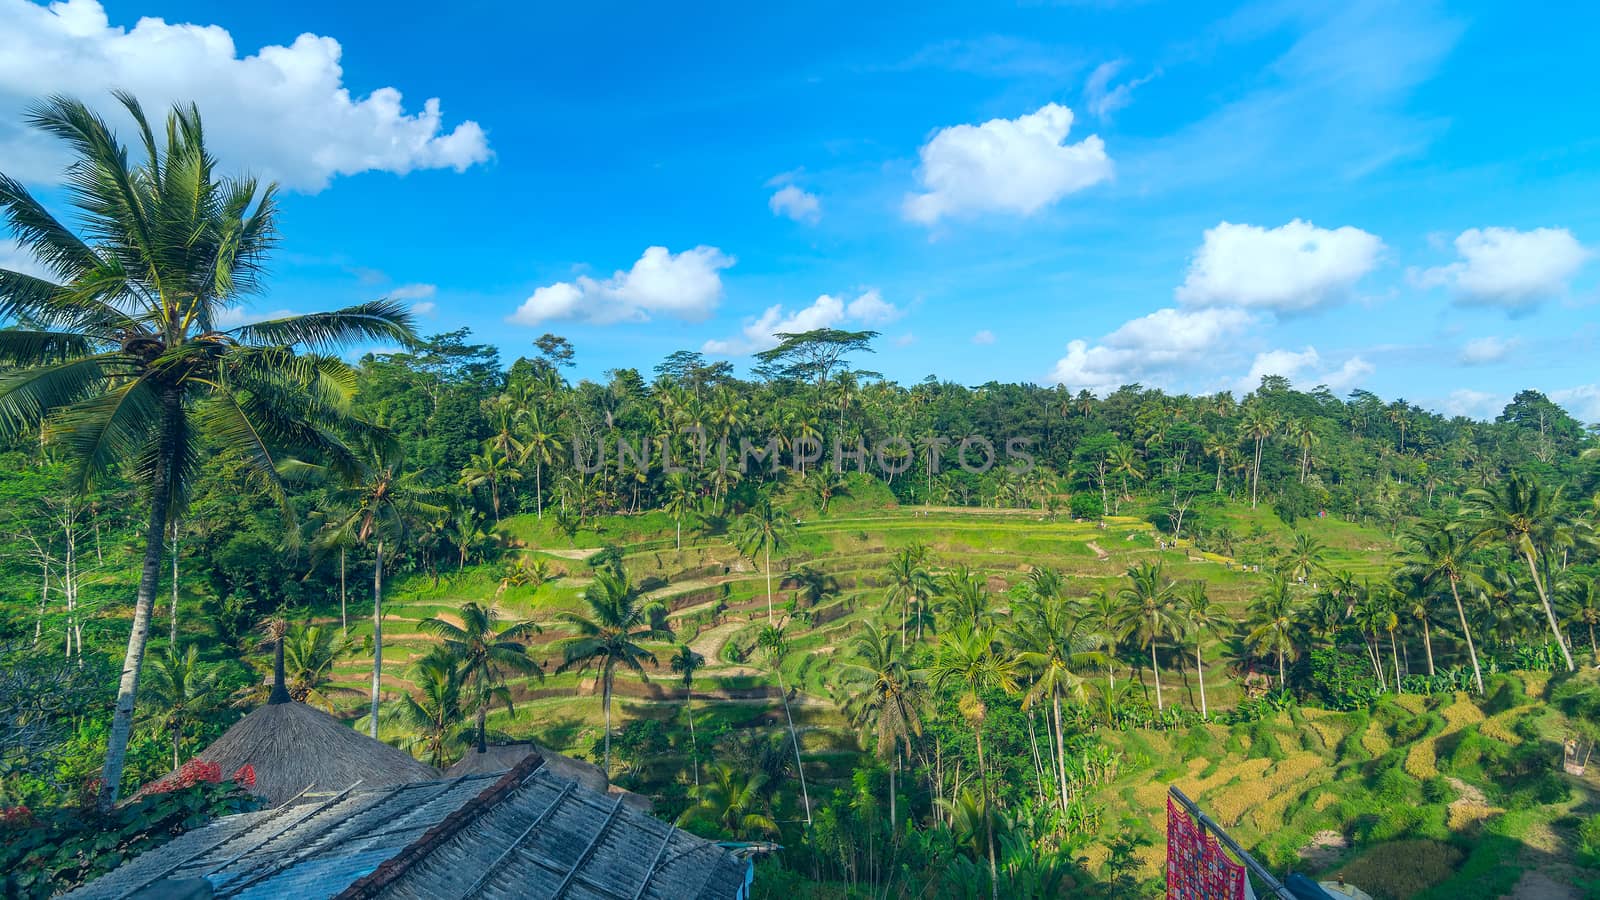 Landscape of famous rice terraces near Ubud in Bali, Indonesia